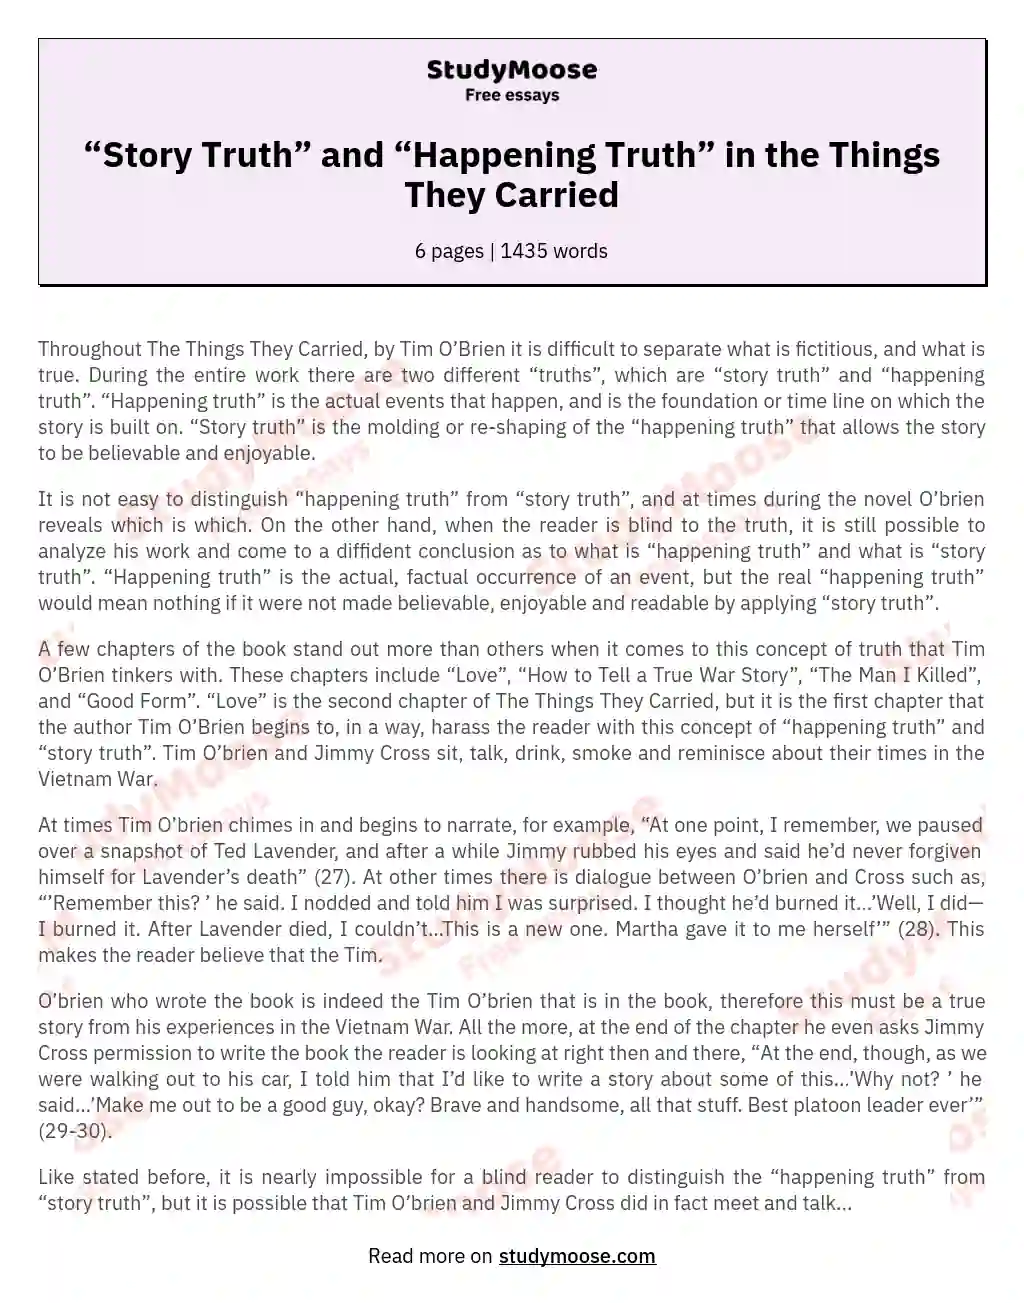 “Story Truth” and “Happening Truth” in the Things They Carried essay